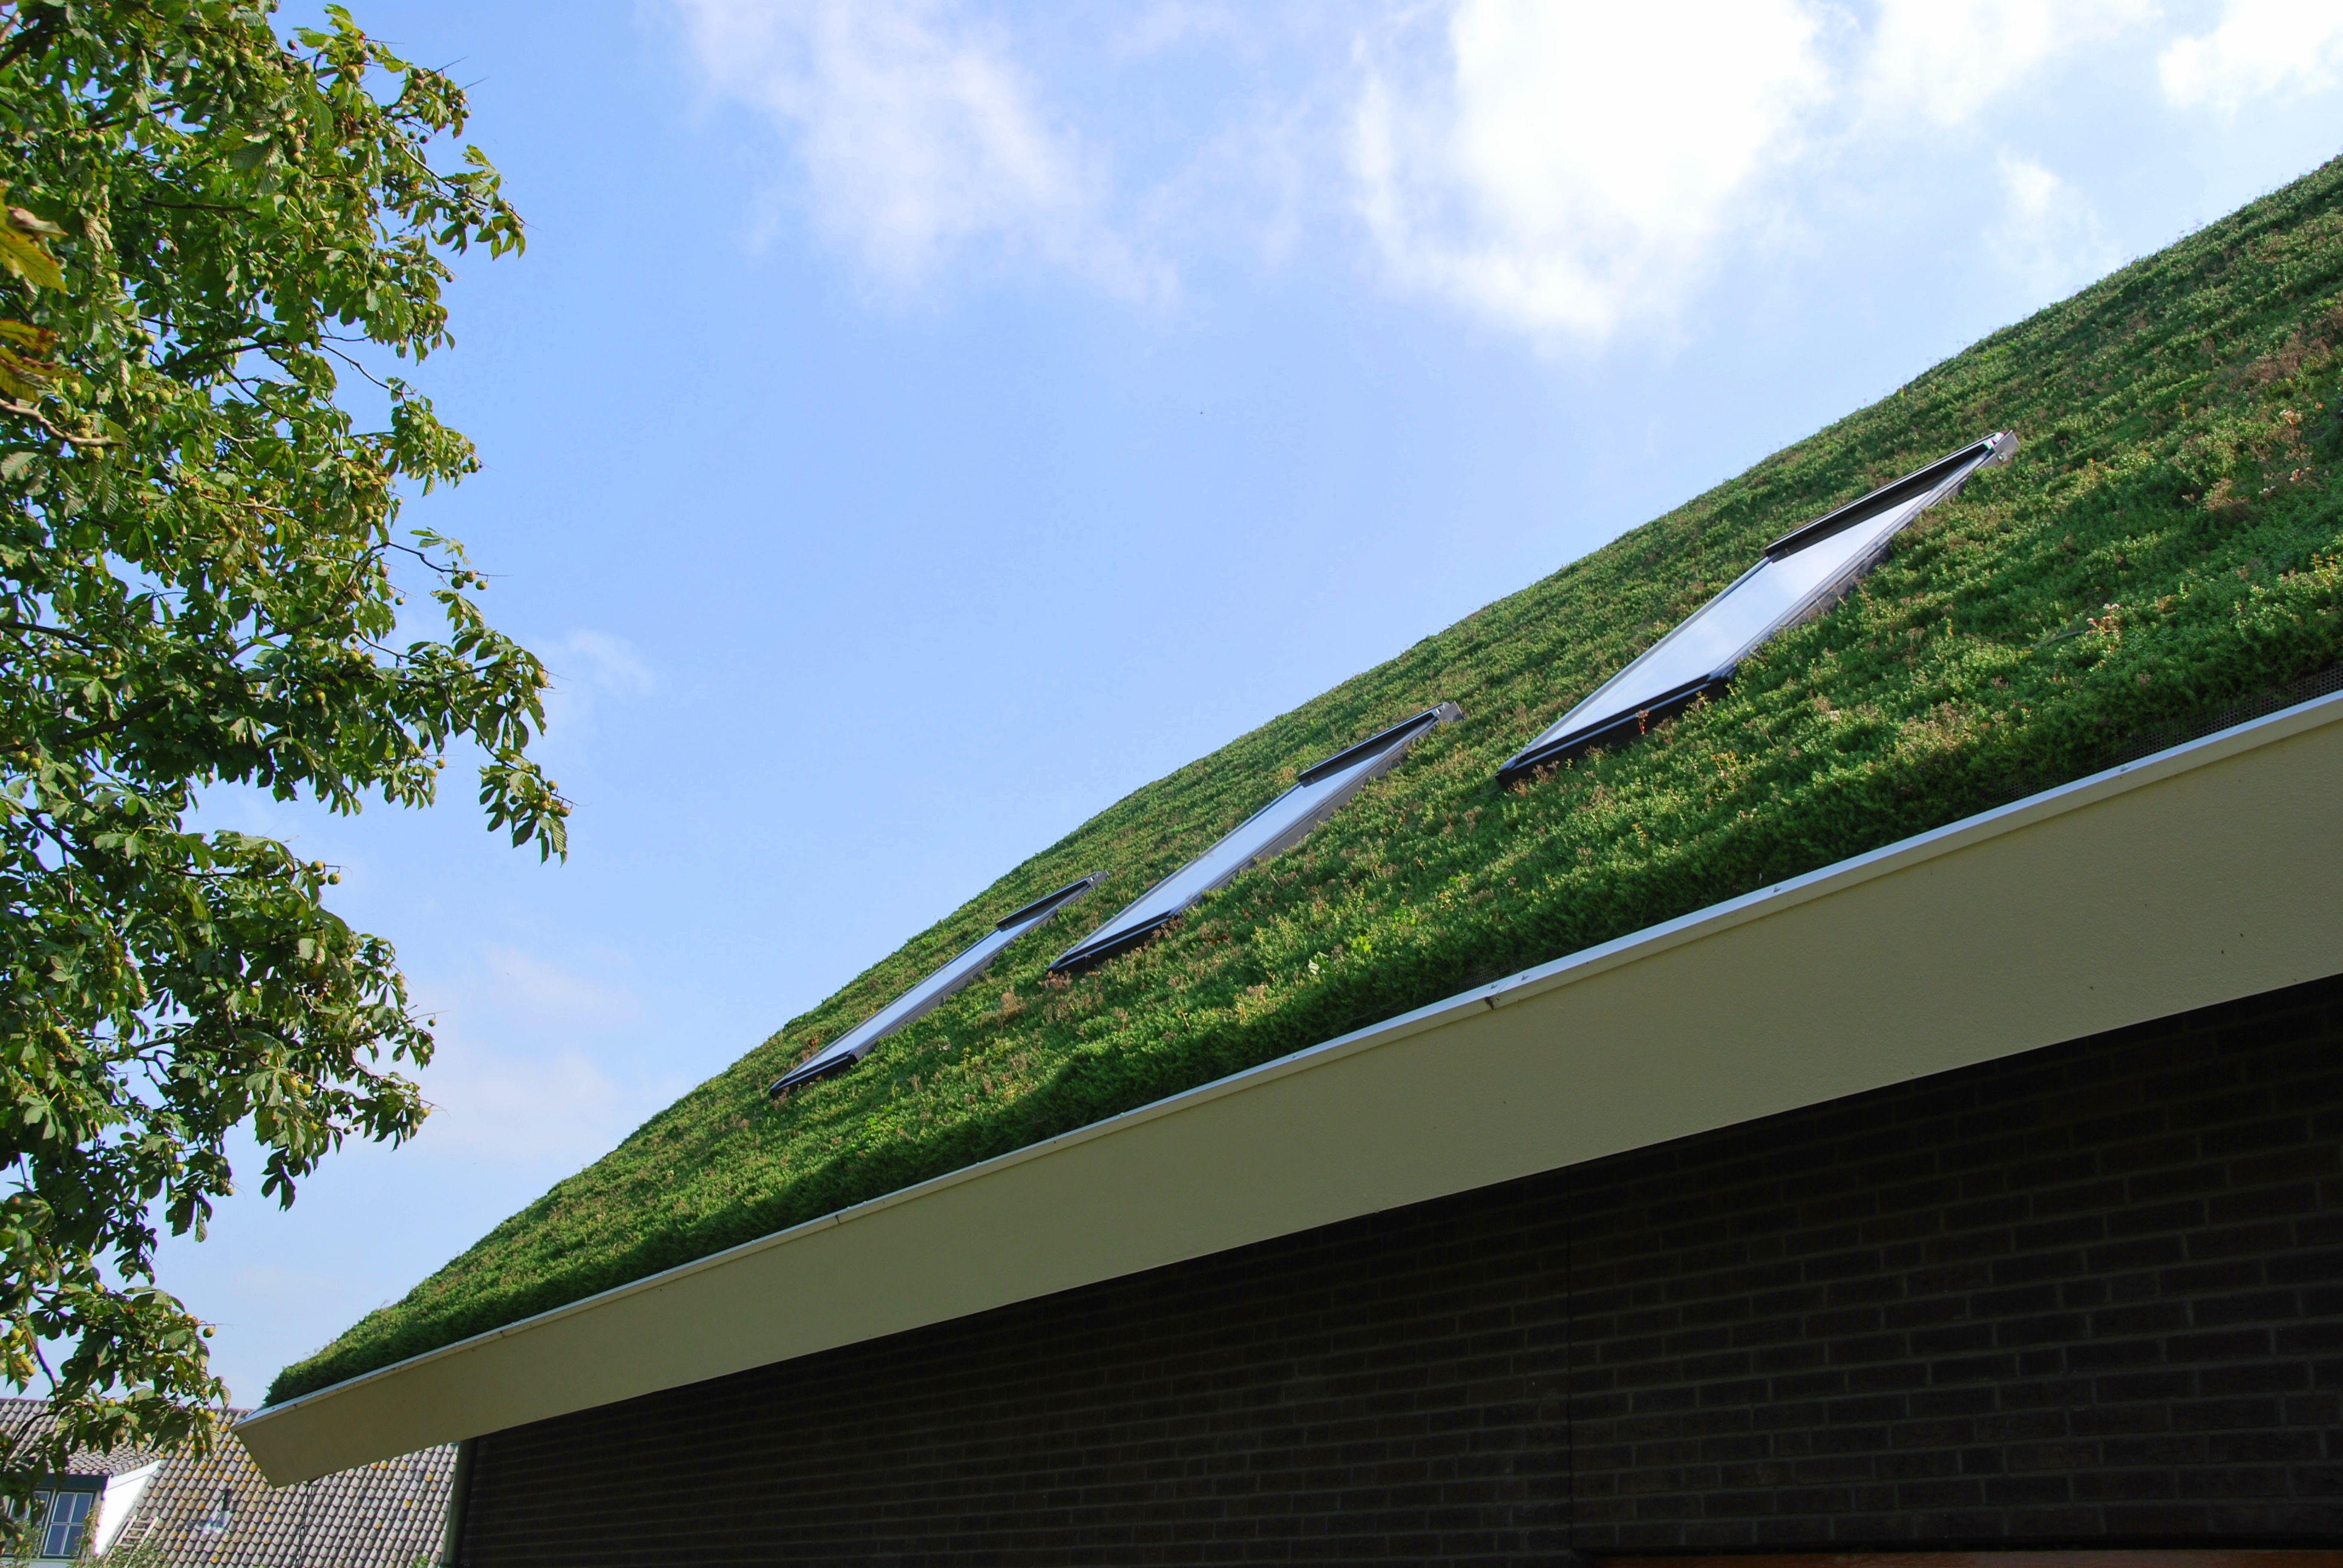 Steeply pitched green roof 25-45°